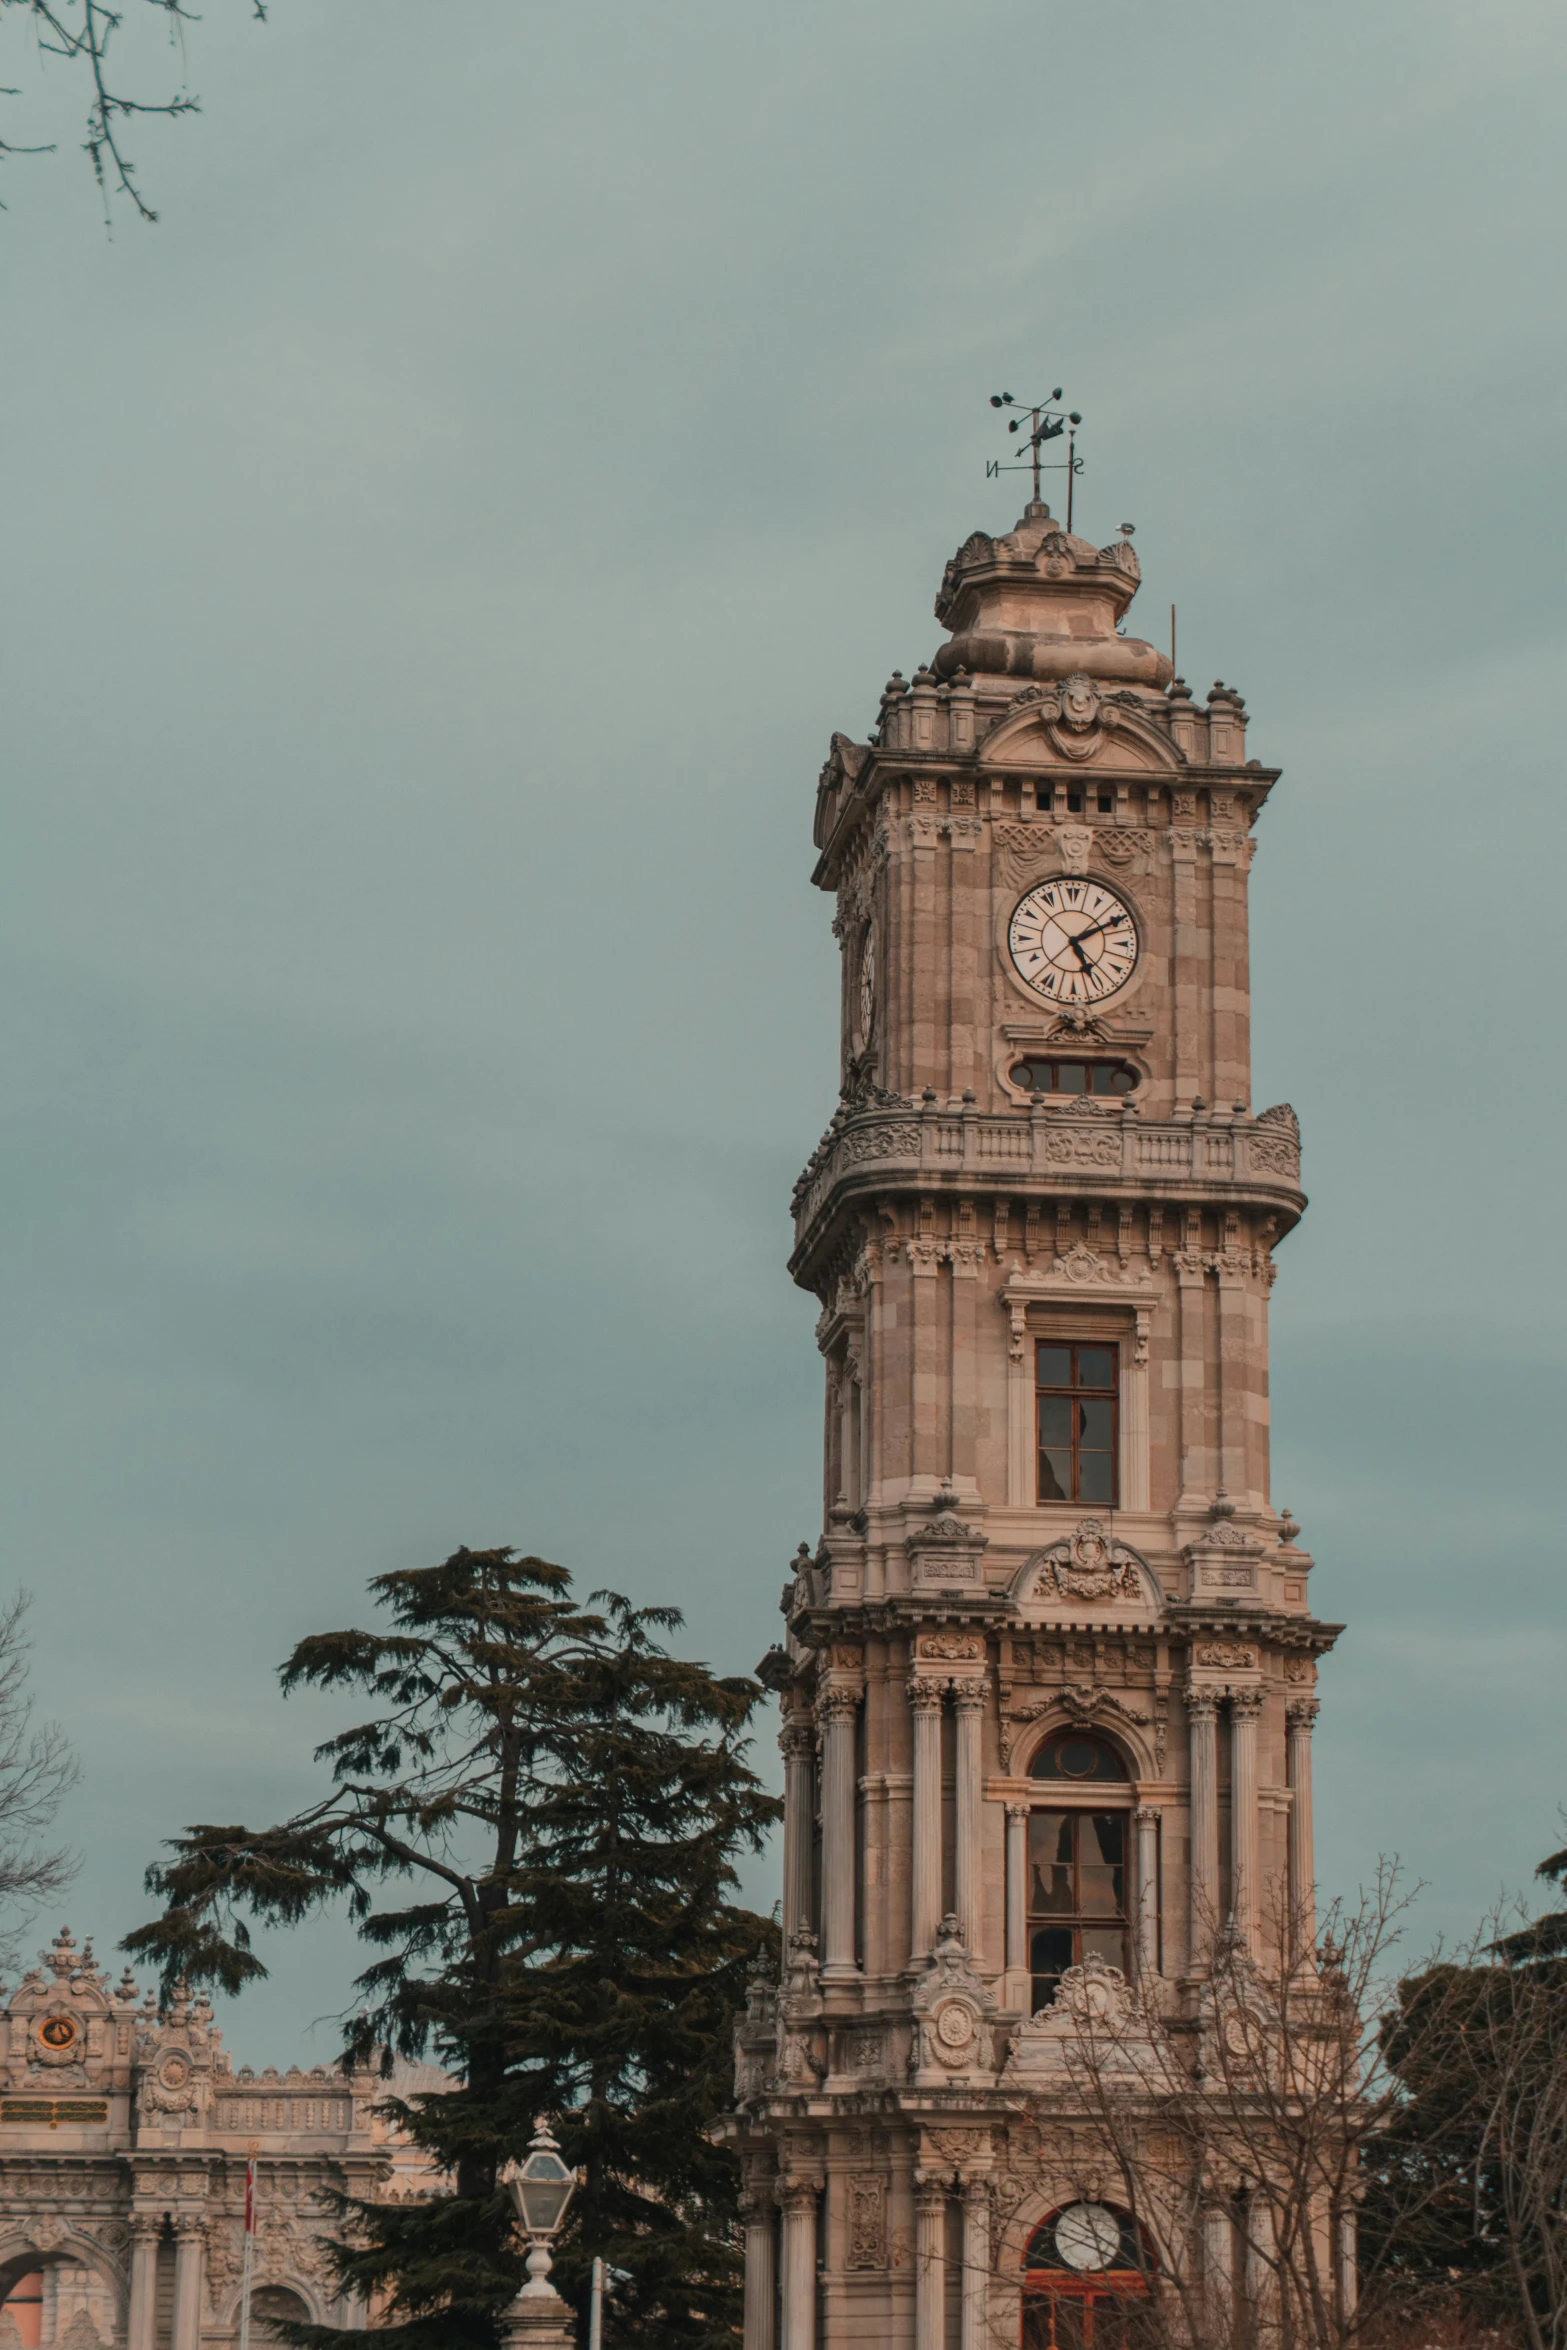 a large clock tower is shown against a gray sky